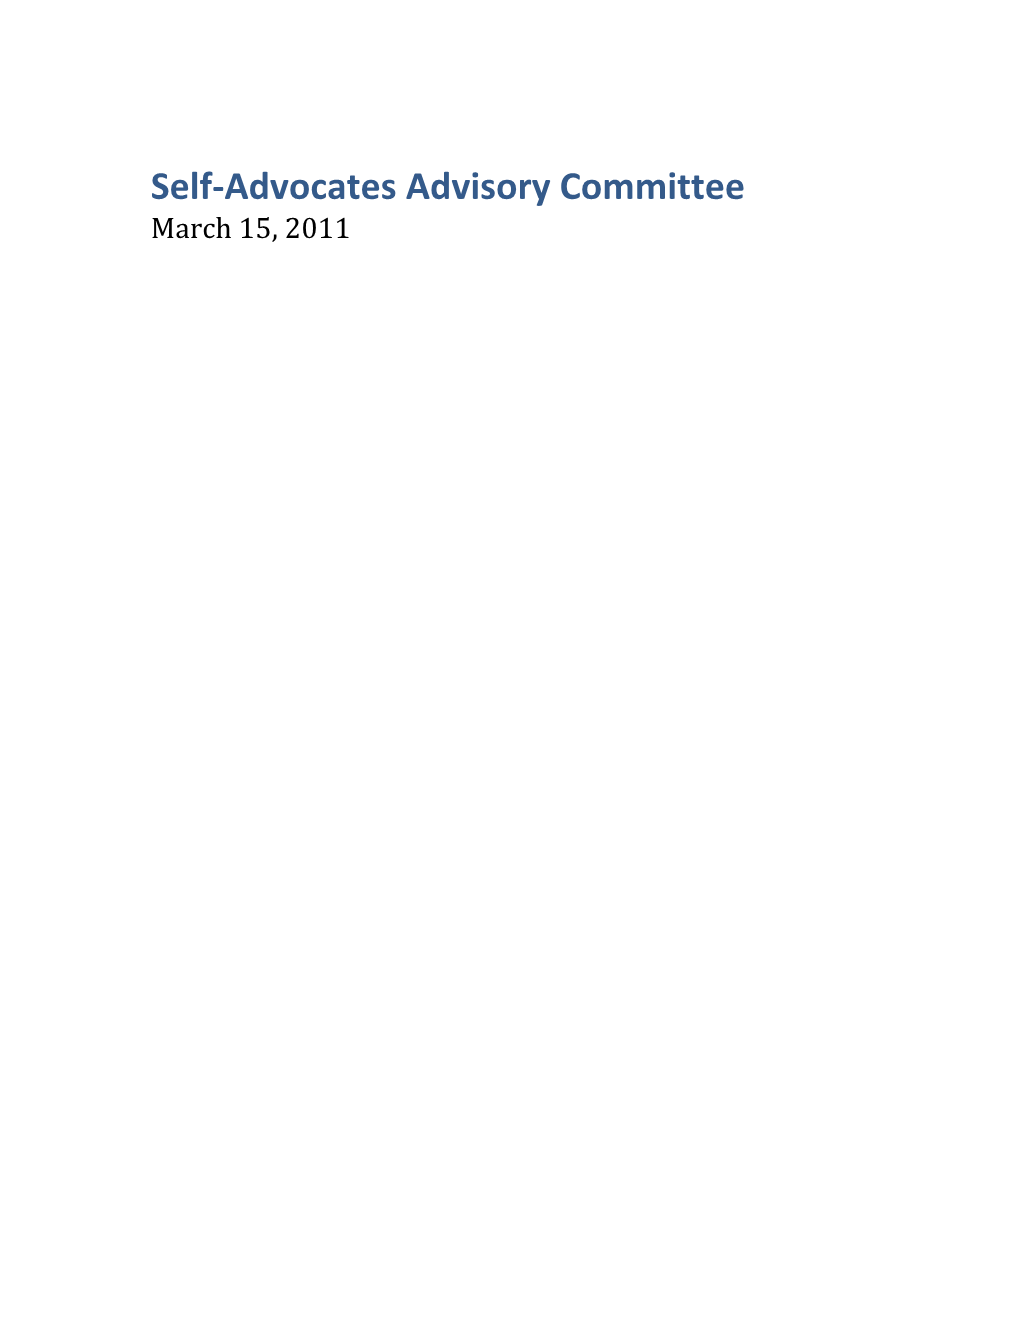 Self-Advocates Advisory Committee Meeting March 2011